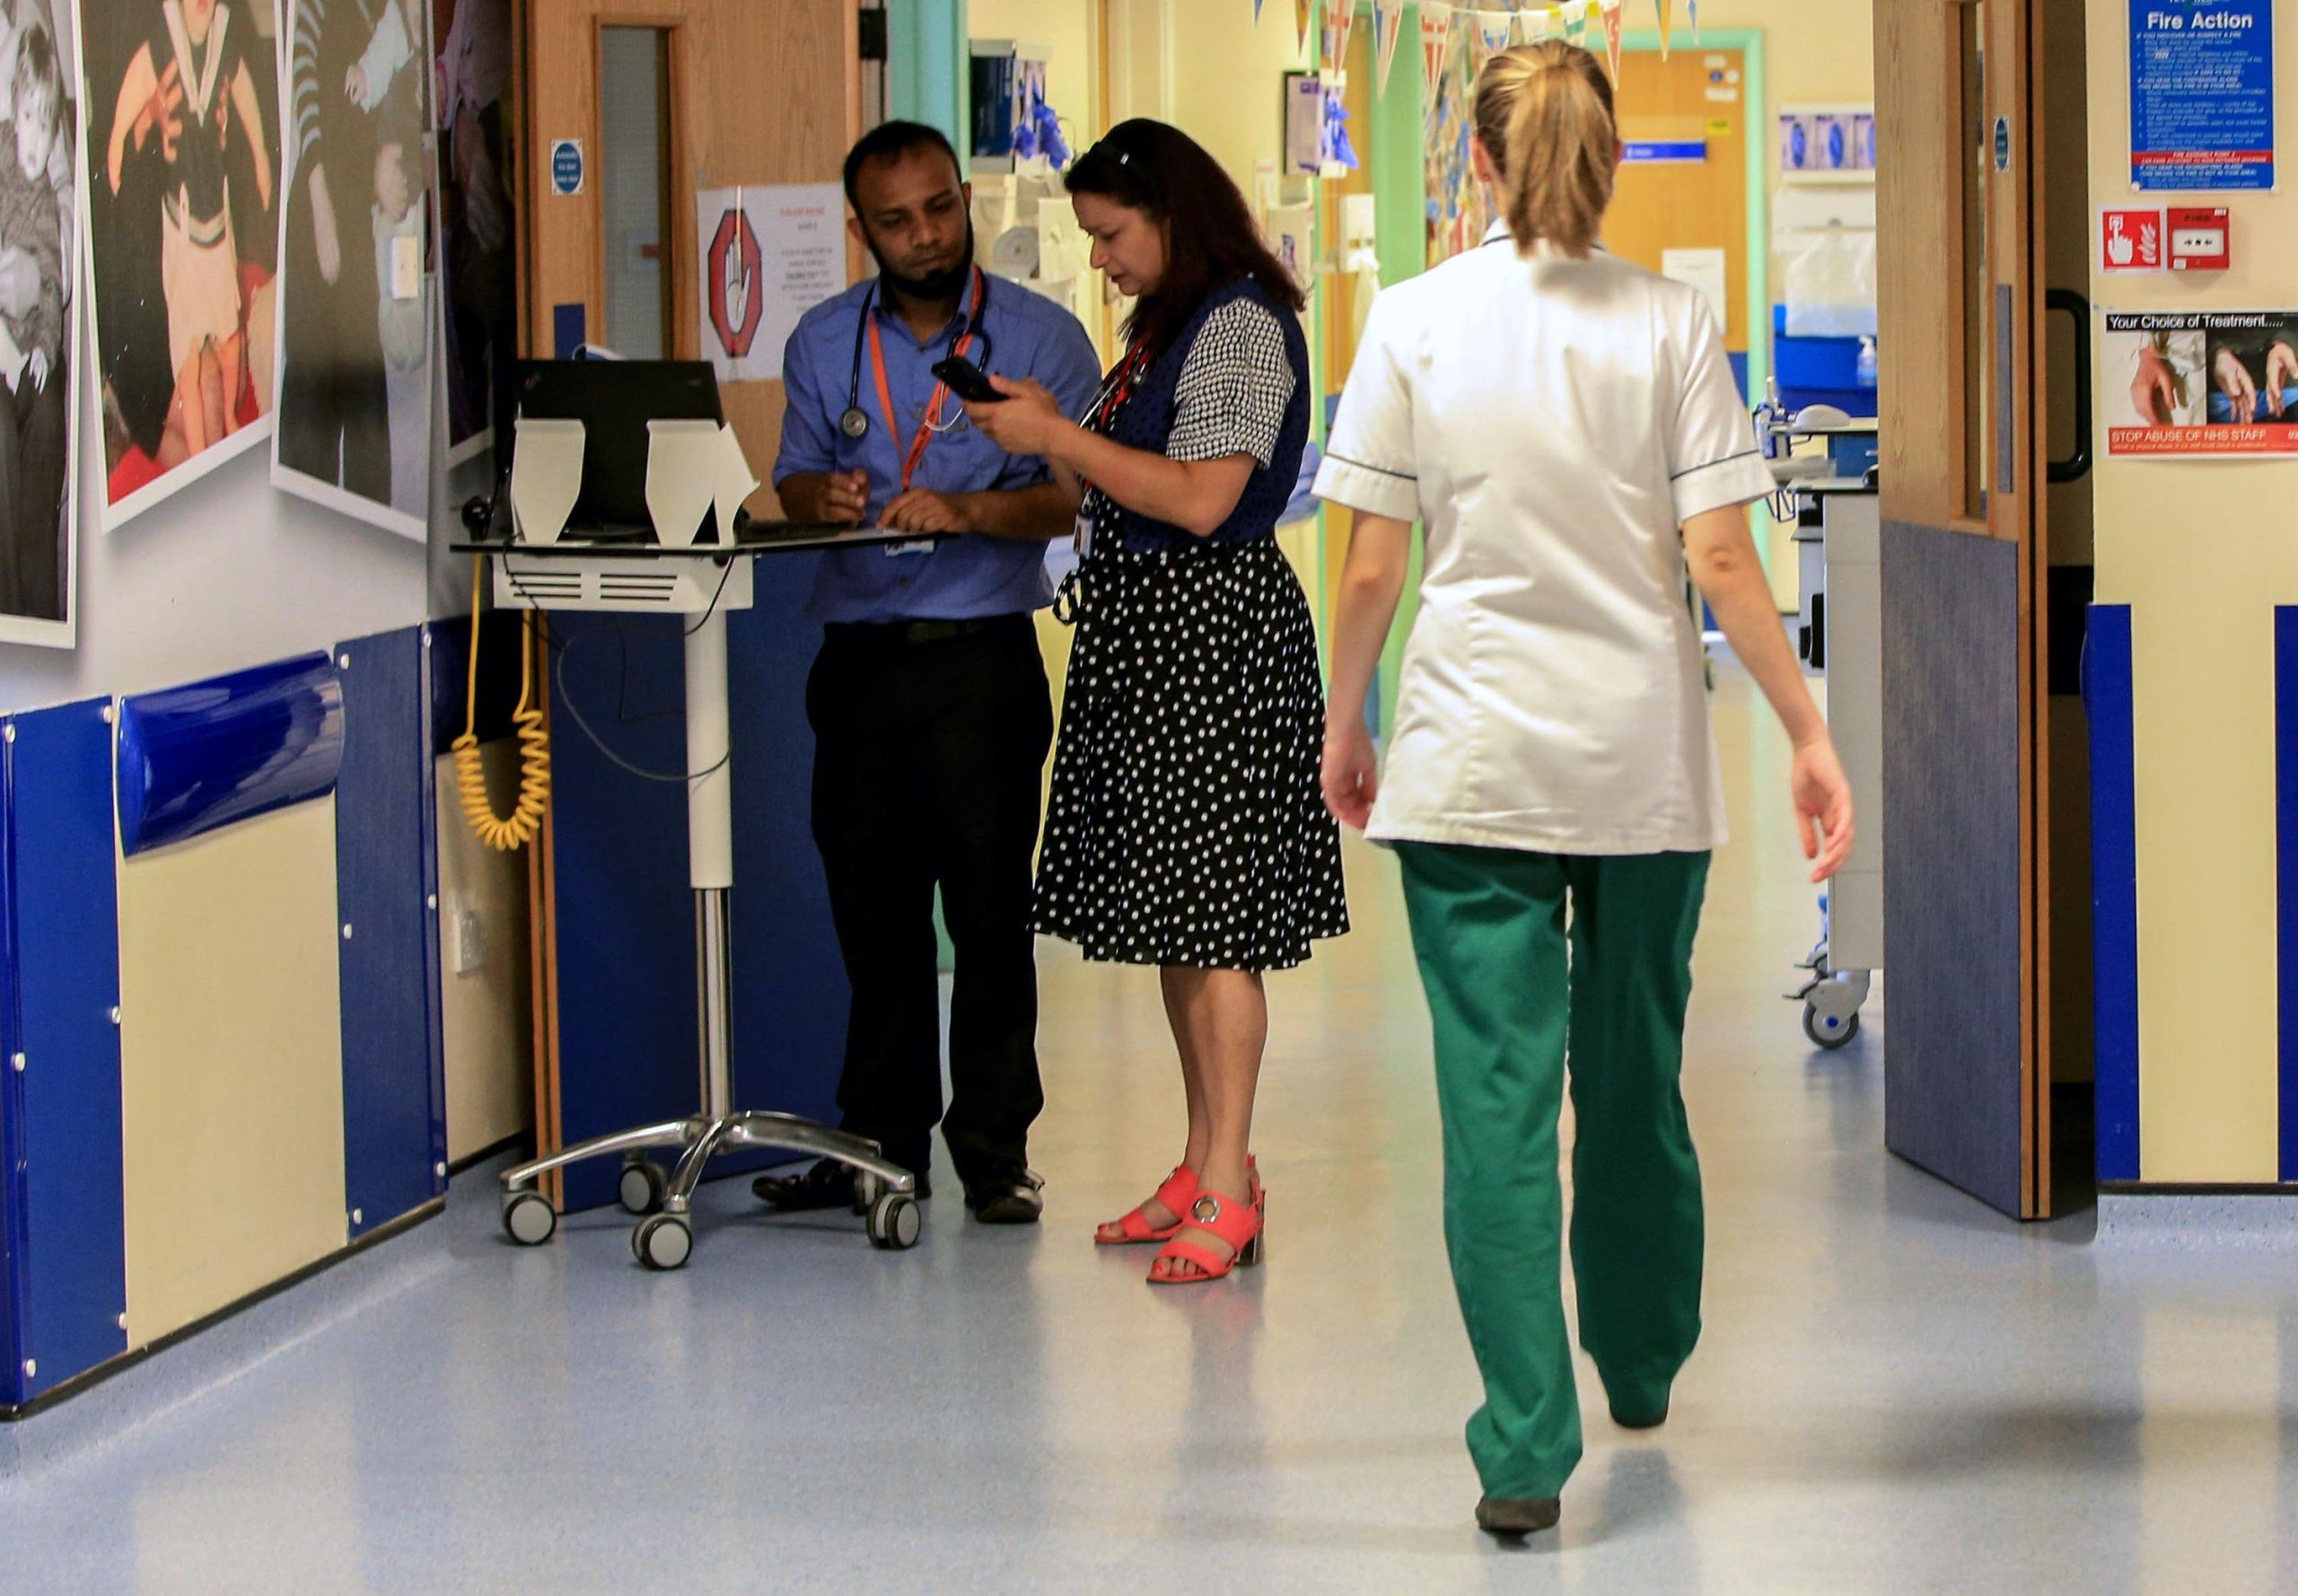 ‘Neglectful and unfair:’ Ending special Covid leave for NHS staff completely unacceptable, says BMA